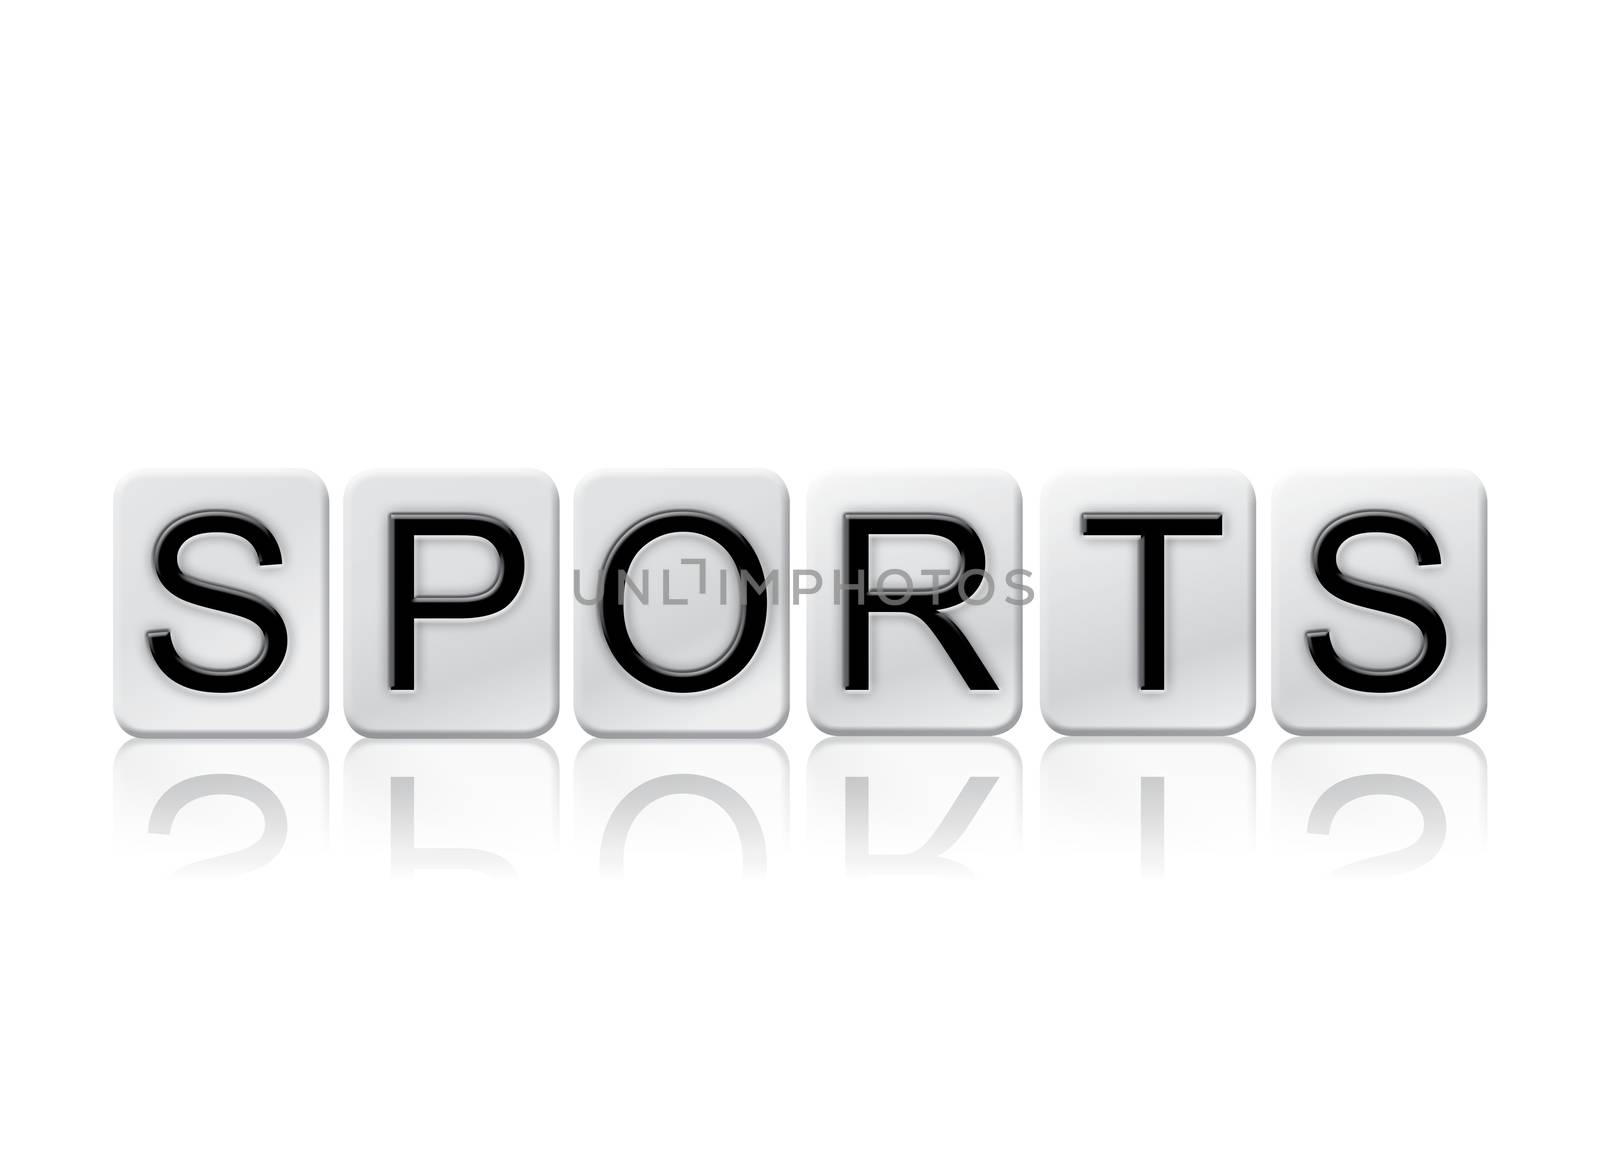 The word "Sports" written in tile letters isolated on a white background.